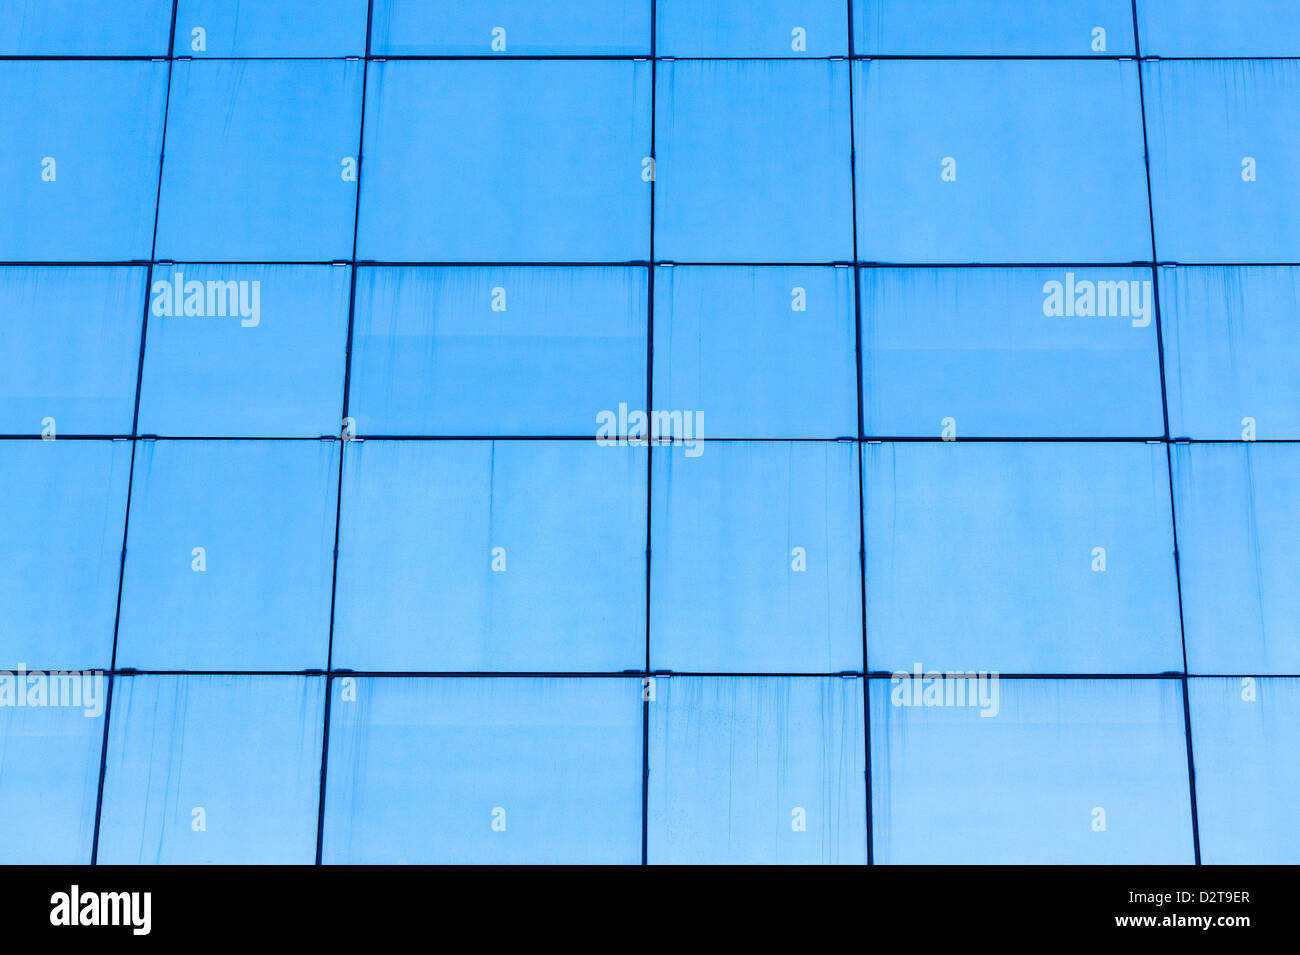 Blue glass building facade pattern Stock Photo